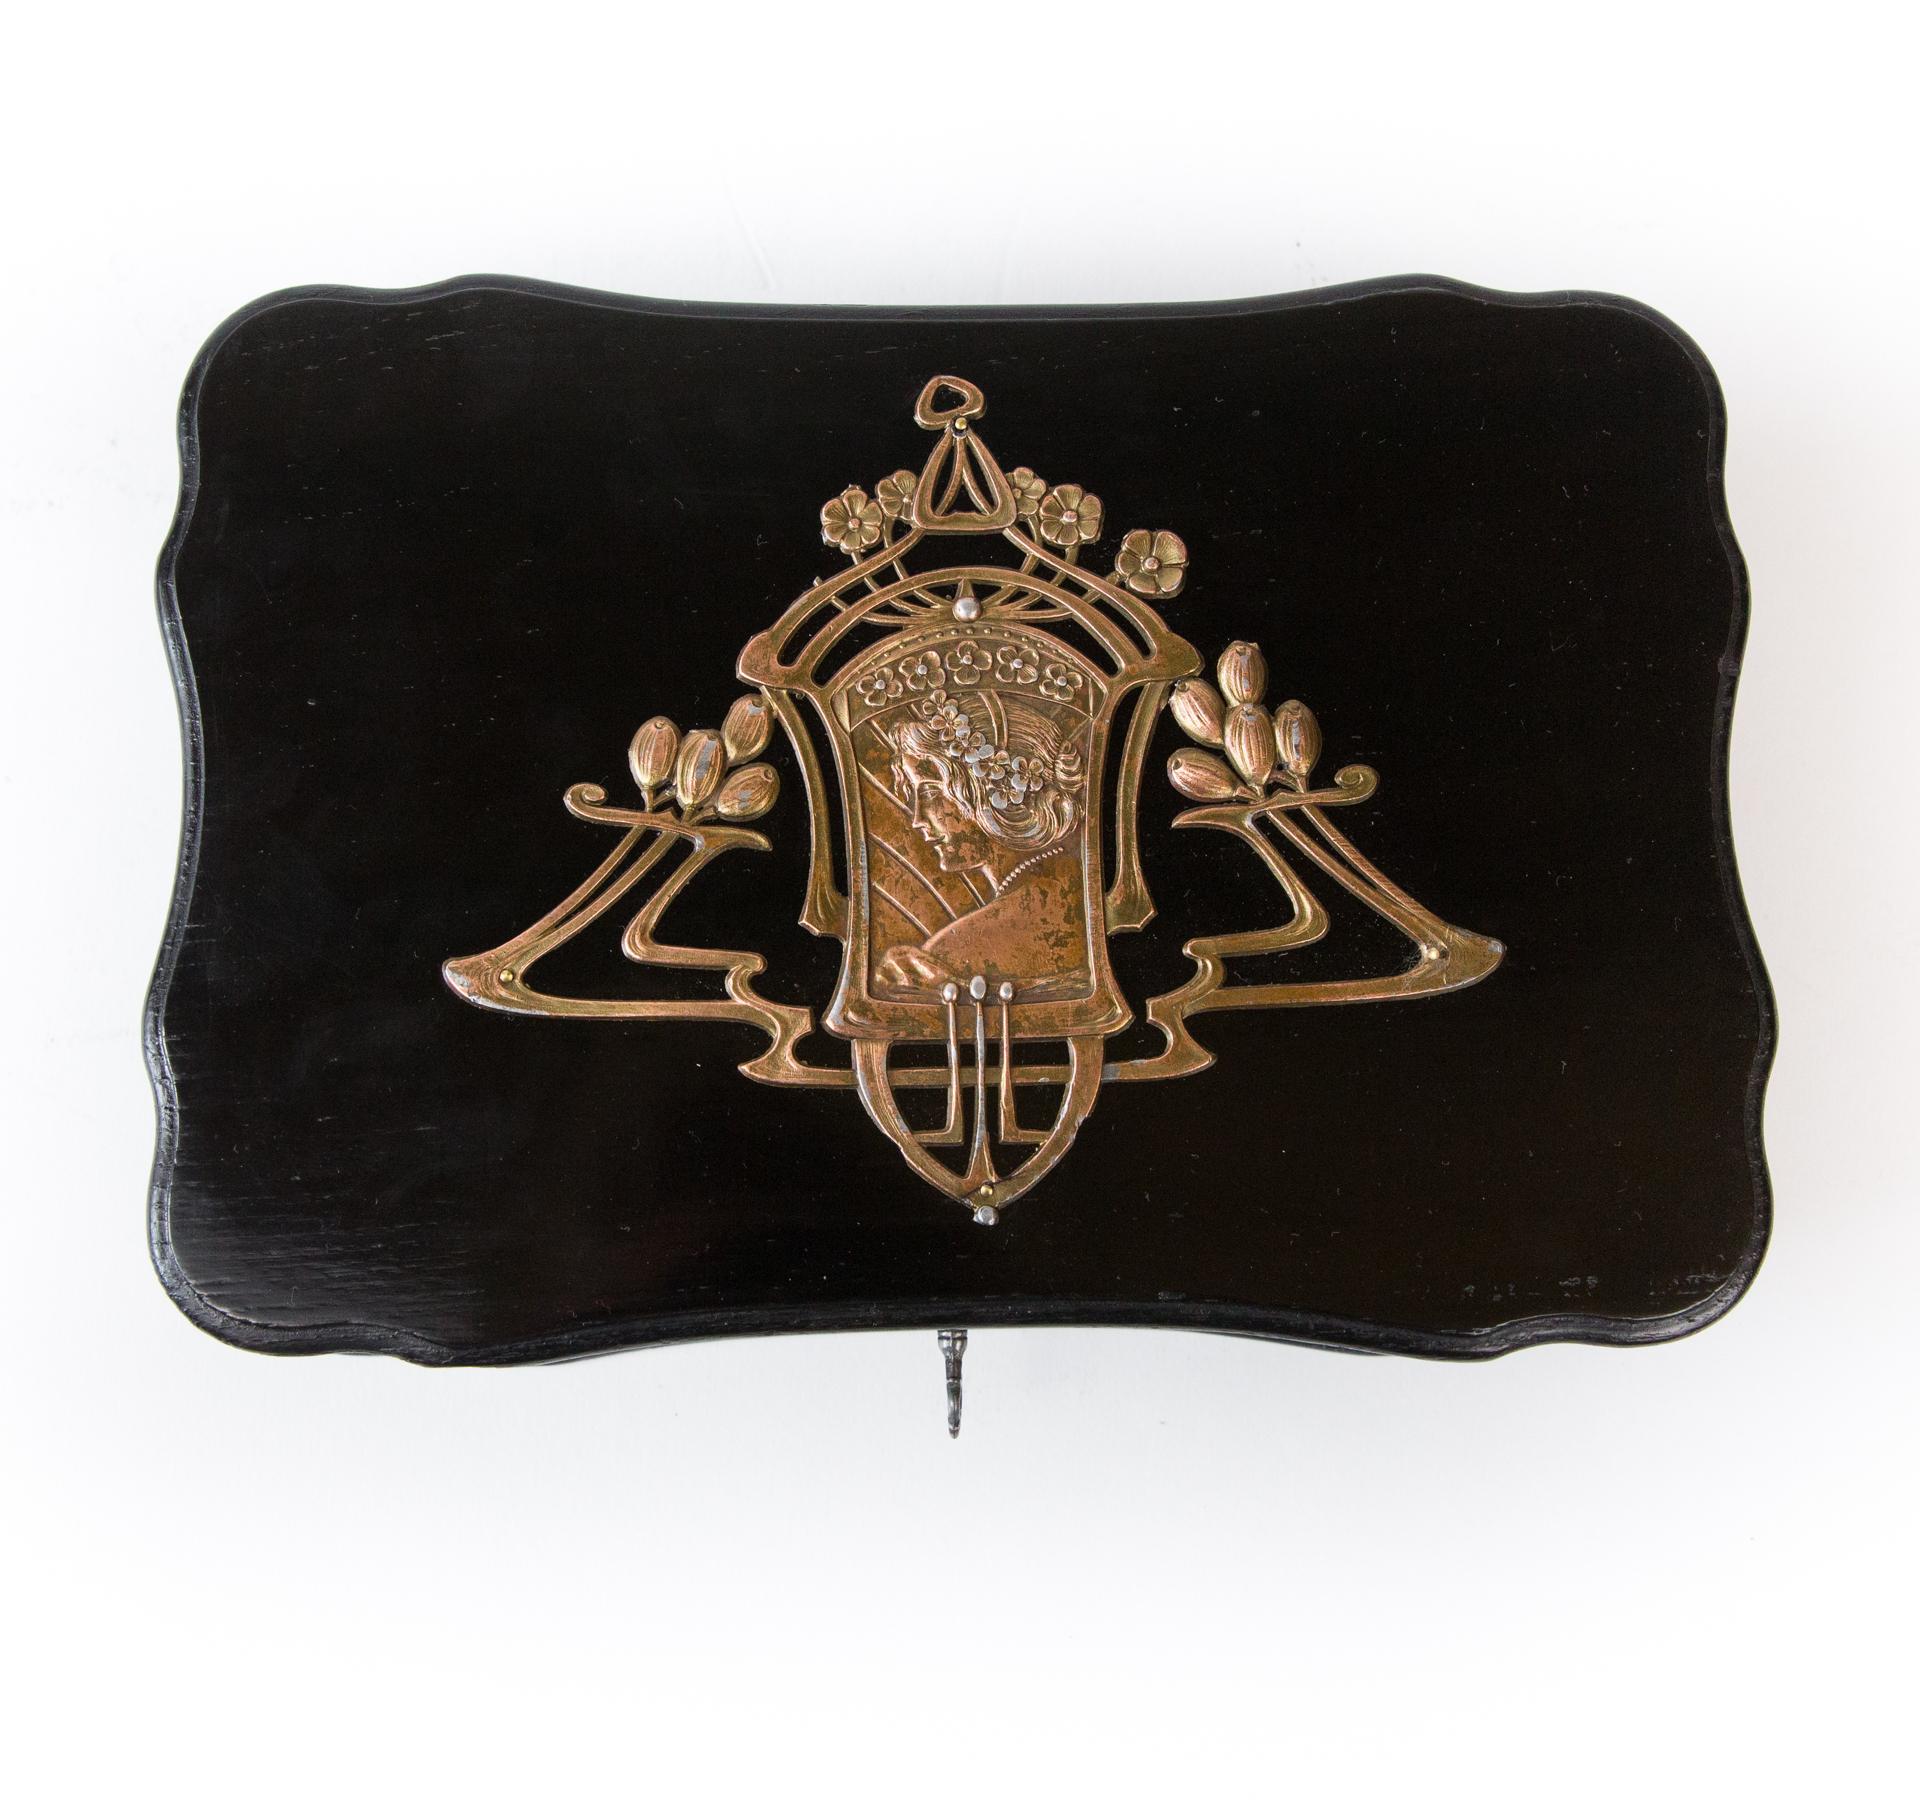 A beautiful Art Nouveau box with openwork application in the Art Nouveau style. Made like a large jewelry brooch. The application pattern is emphasized by ebony black and shine of noble polish.

The wooden casket is an example of Art Nouveau